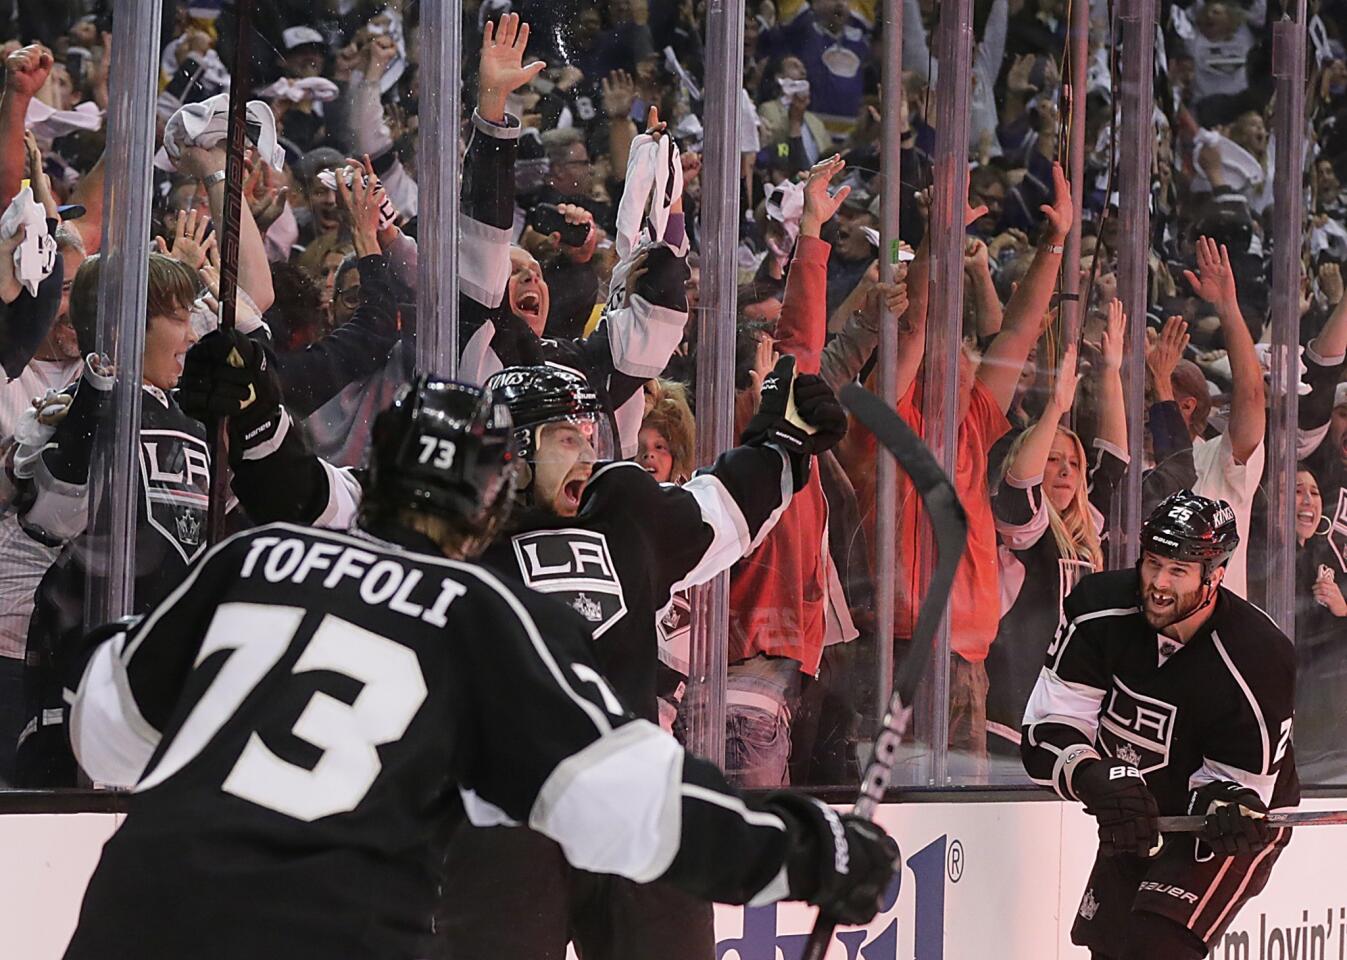 Kings center Trevor Lewis is about to be joined in celebration by teammates Tyler Toffoli and Dustin Penner after scoring the eventual winning goal against the Sharks in the third period of Game 2 on Thursday night at Staples Center.